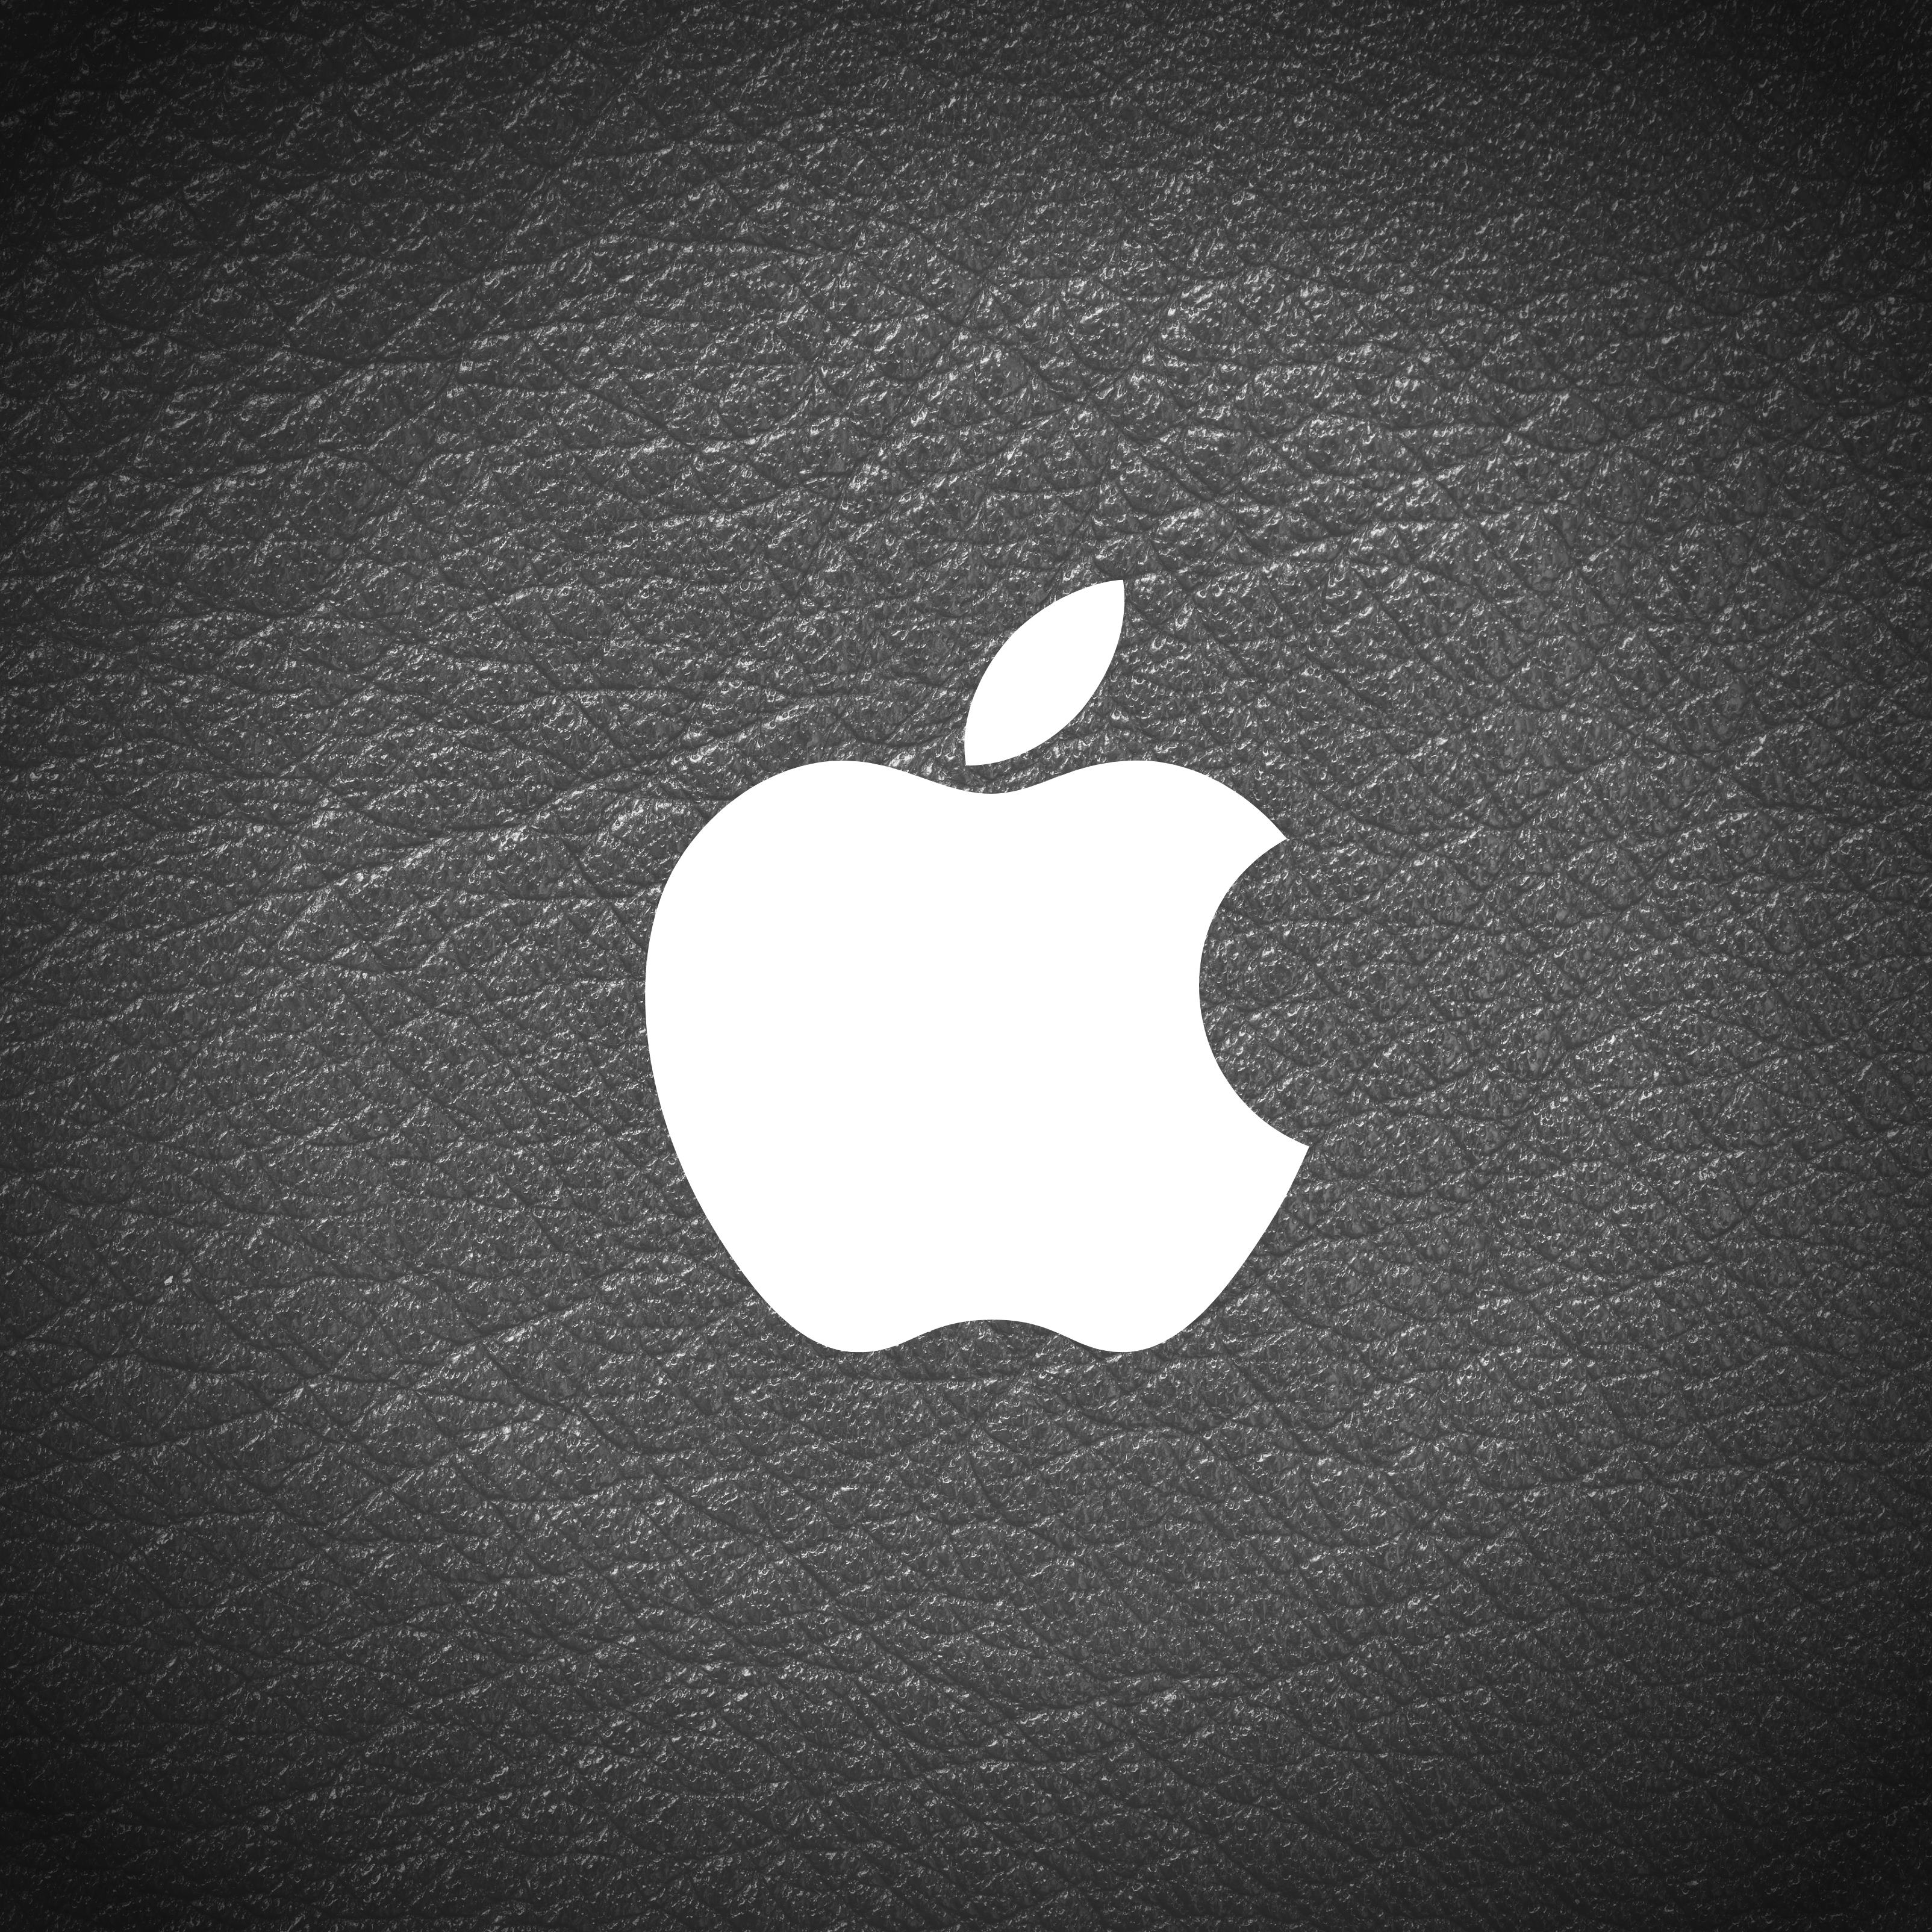 iPad Pro 2020 wallpapers Apple Logo Leather Black and White iPad Wallpaper